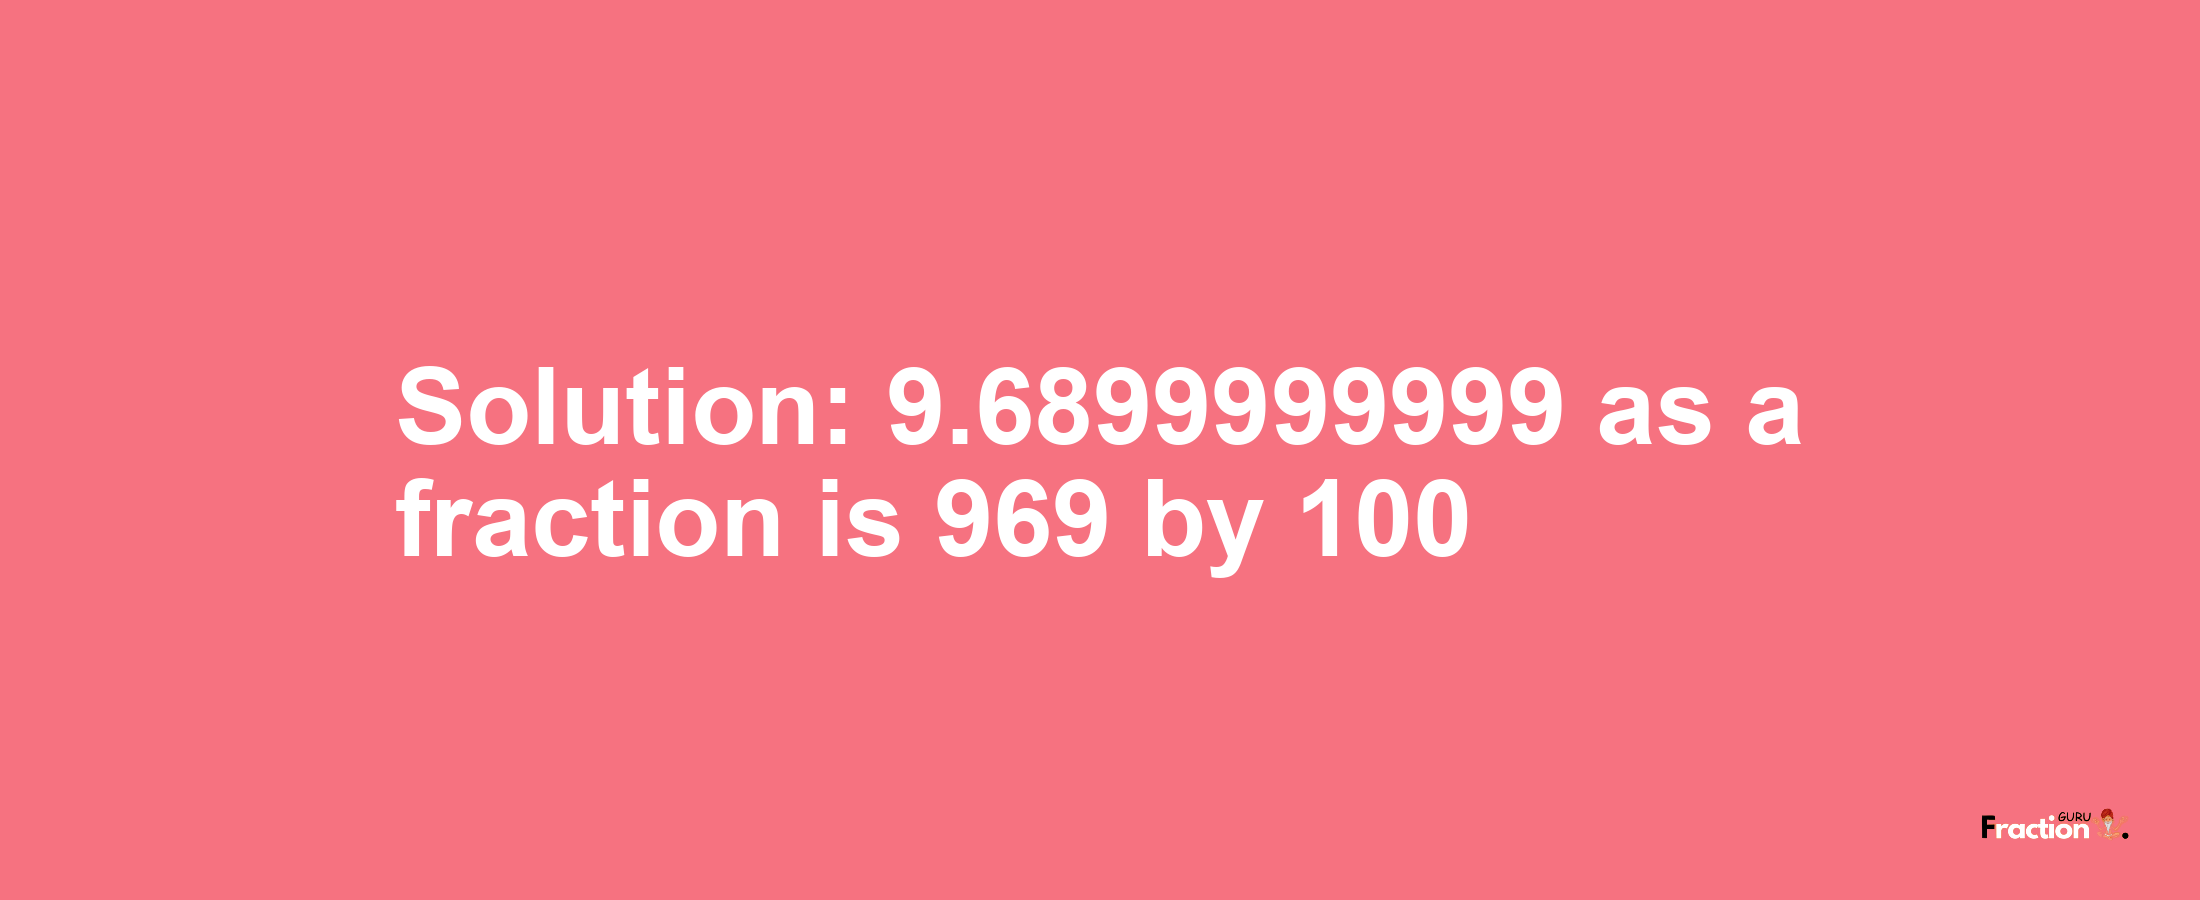 Solution:9.6899999999 as a fraction is 969/100